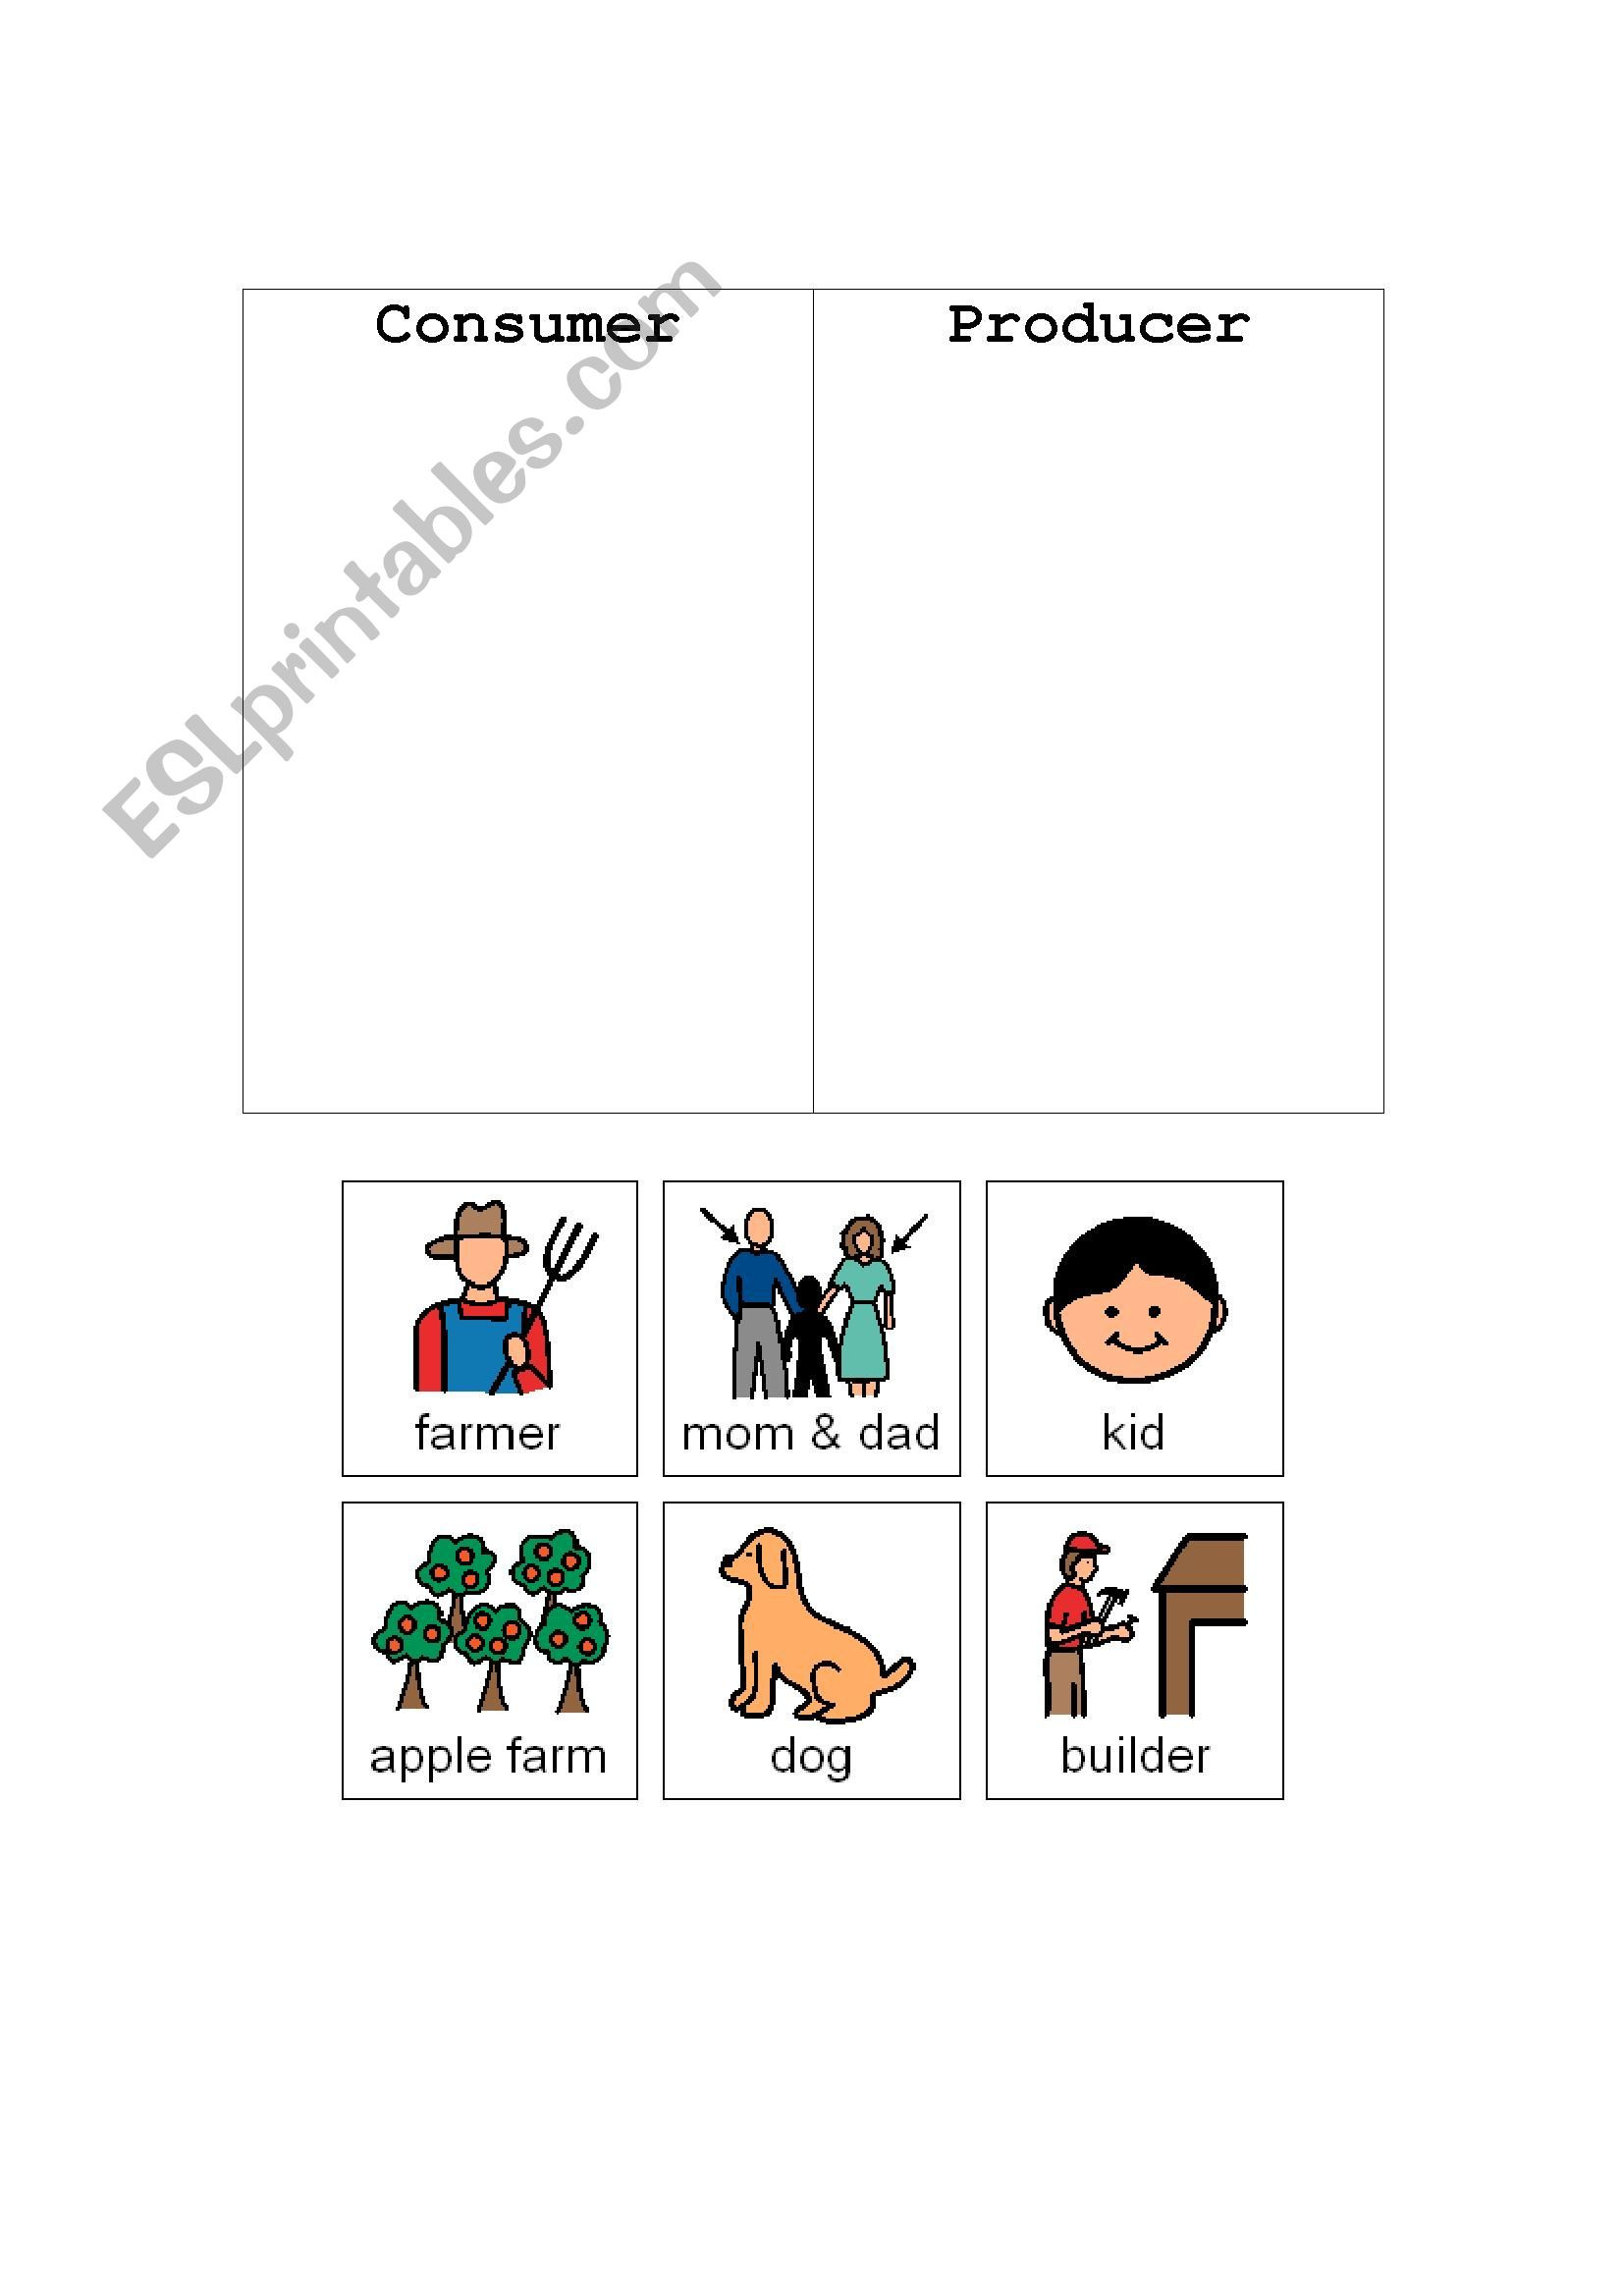 Producers and Consumers Worksheet English Worksheets Consumer and Producer sort